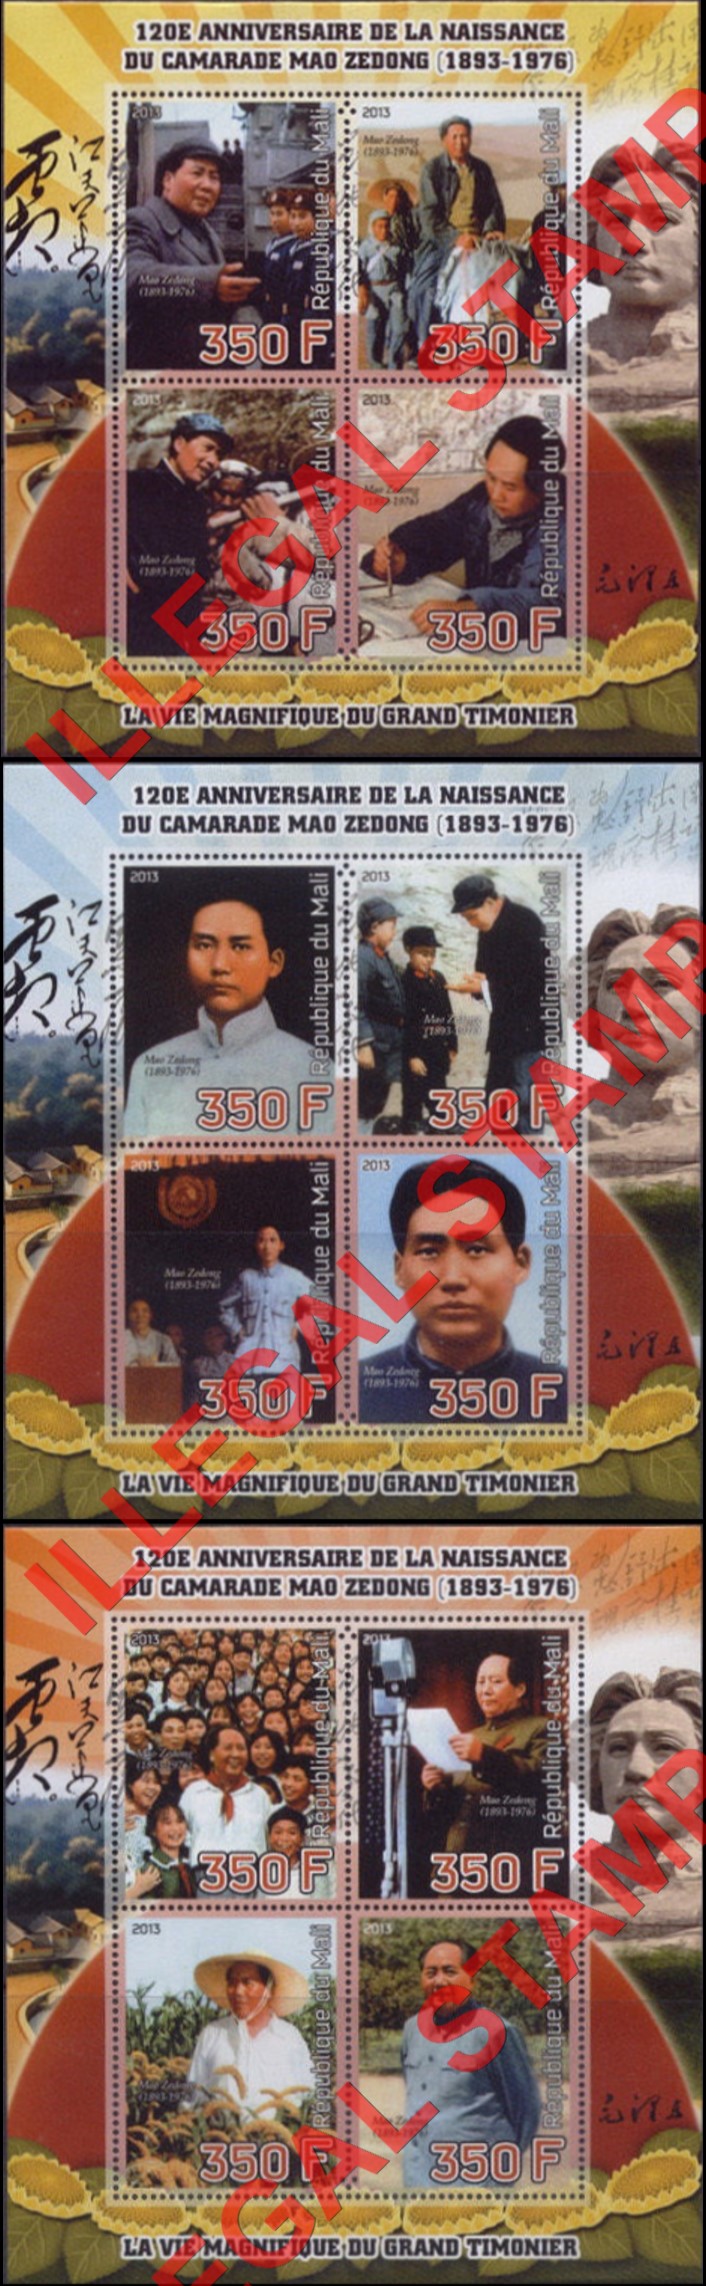 Mali 2013 Mao Zedong Illegal Stamp Souvenir Sheets of 4